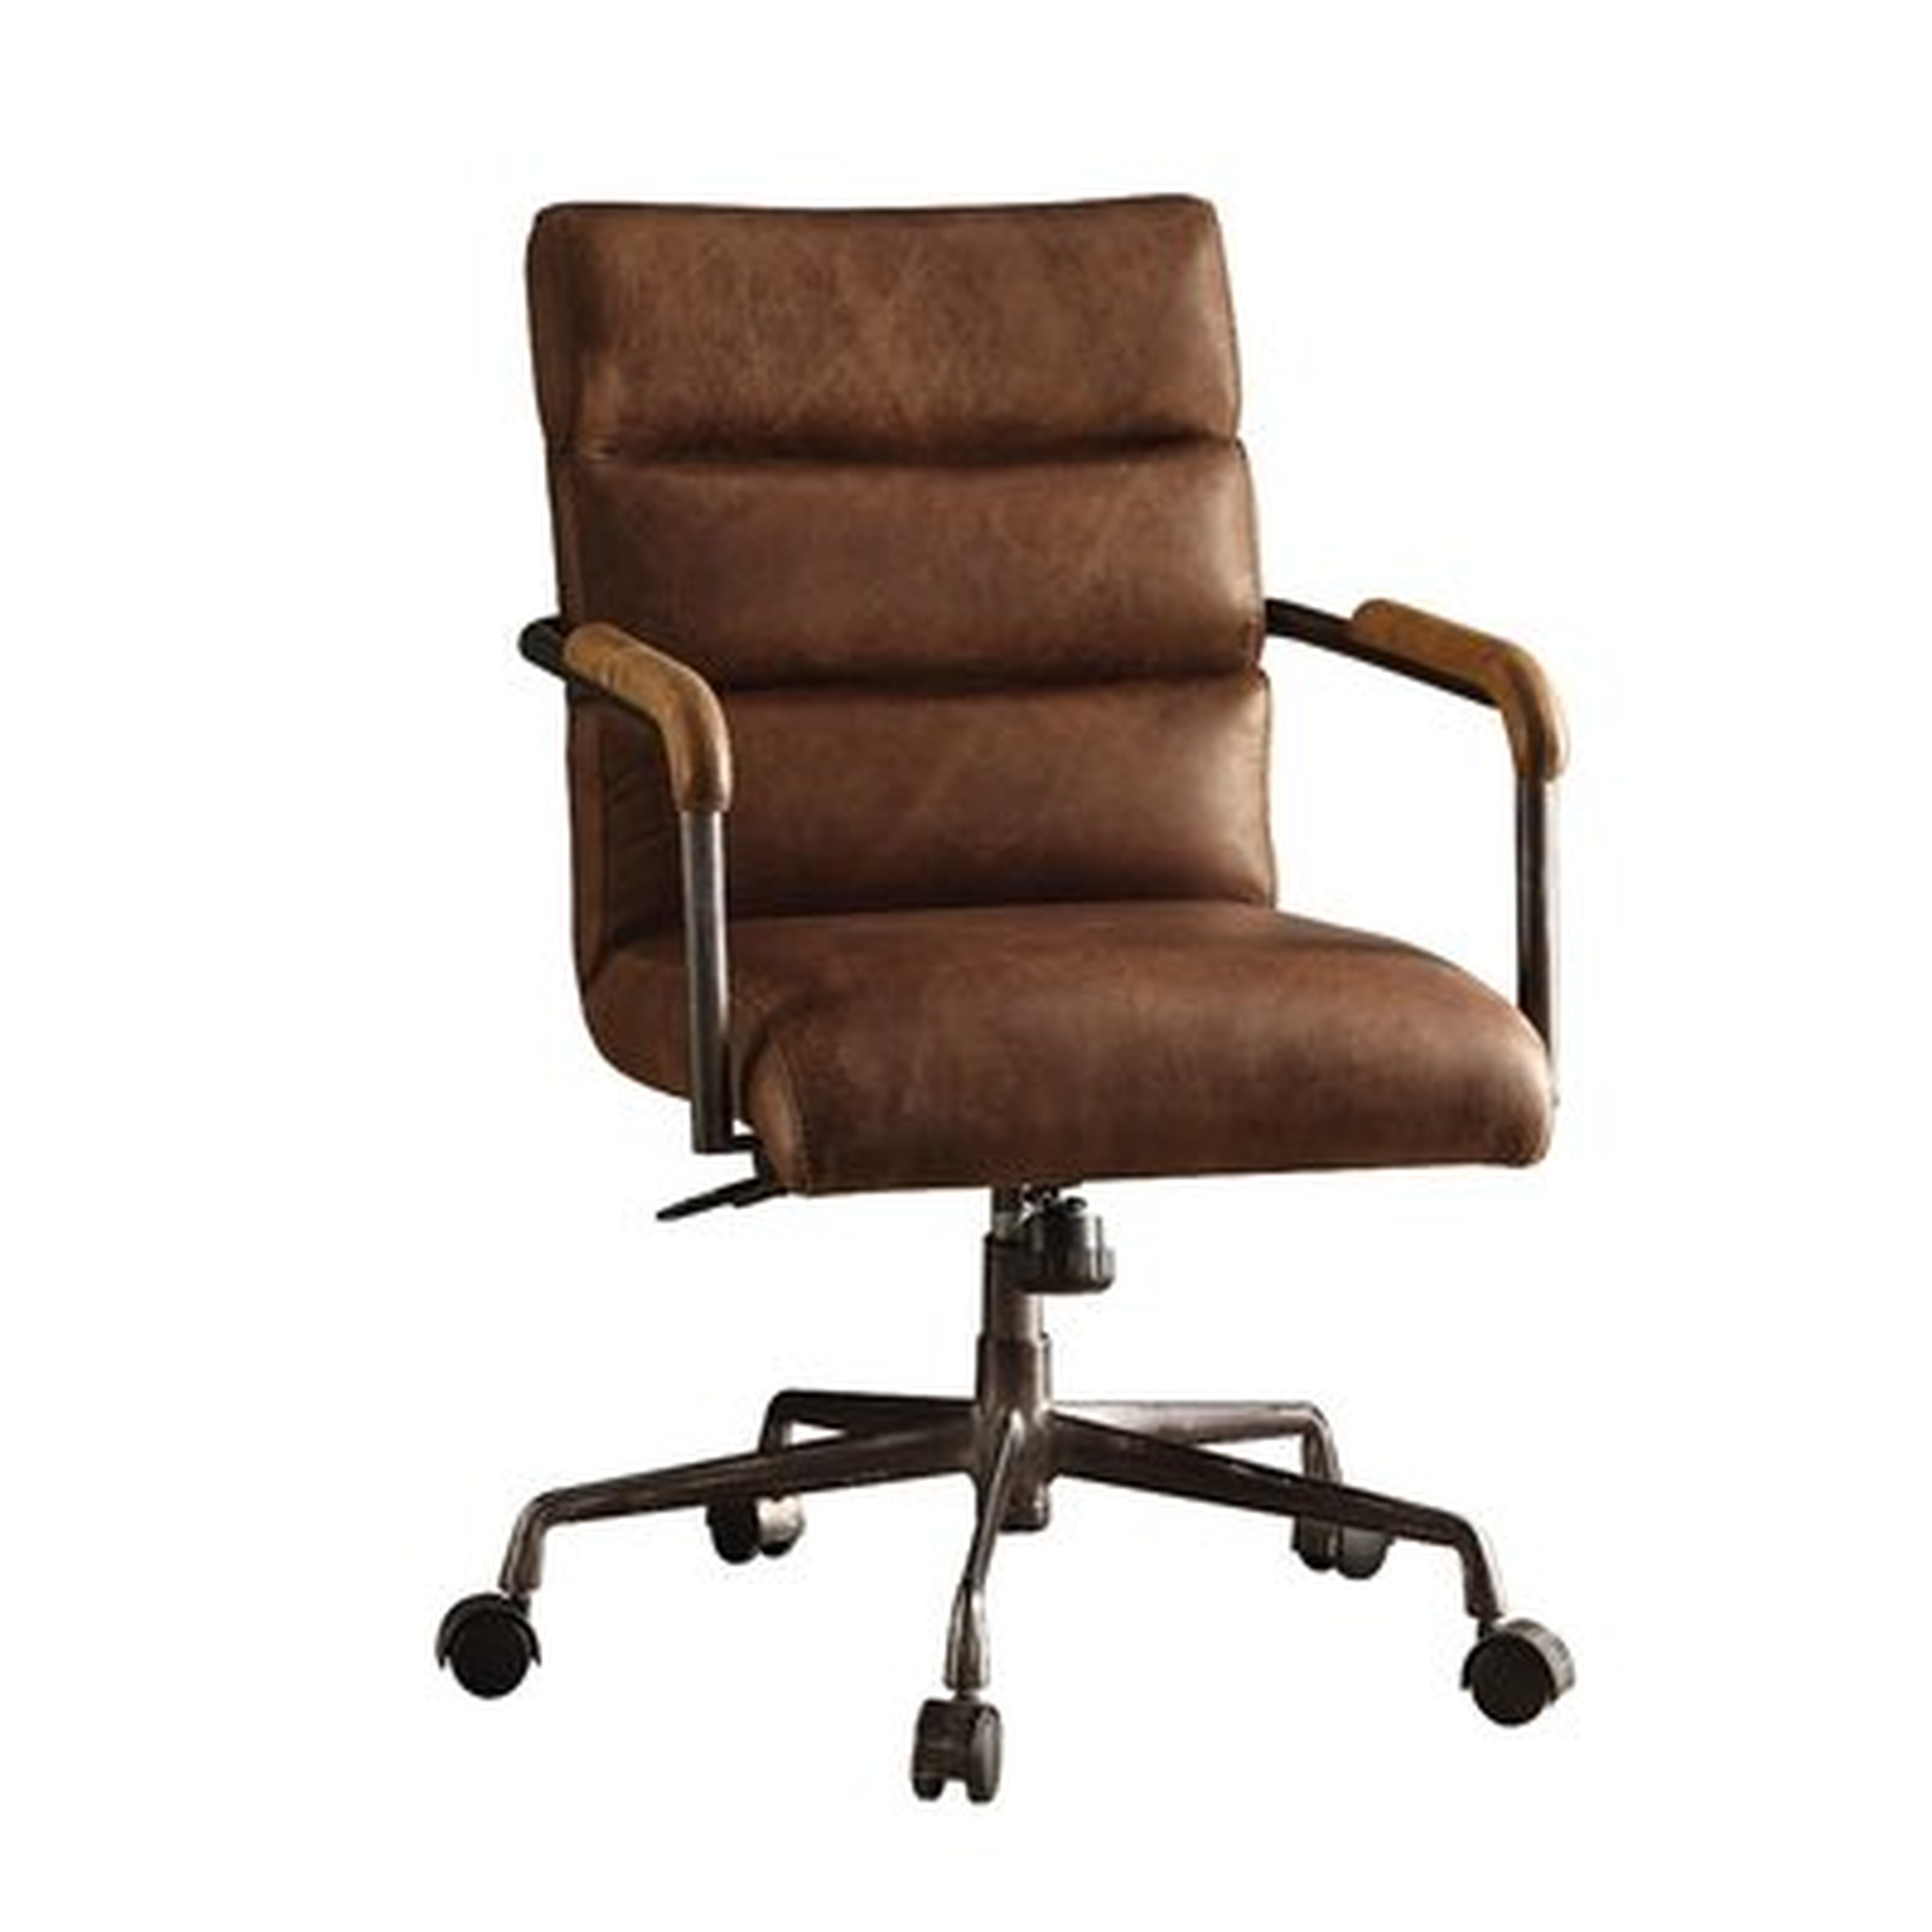 Sophia Genuine Leather Conference Chair - Birch Lane